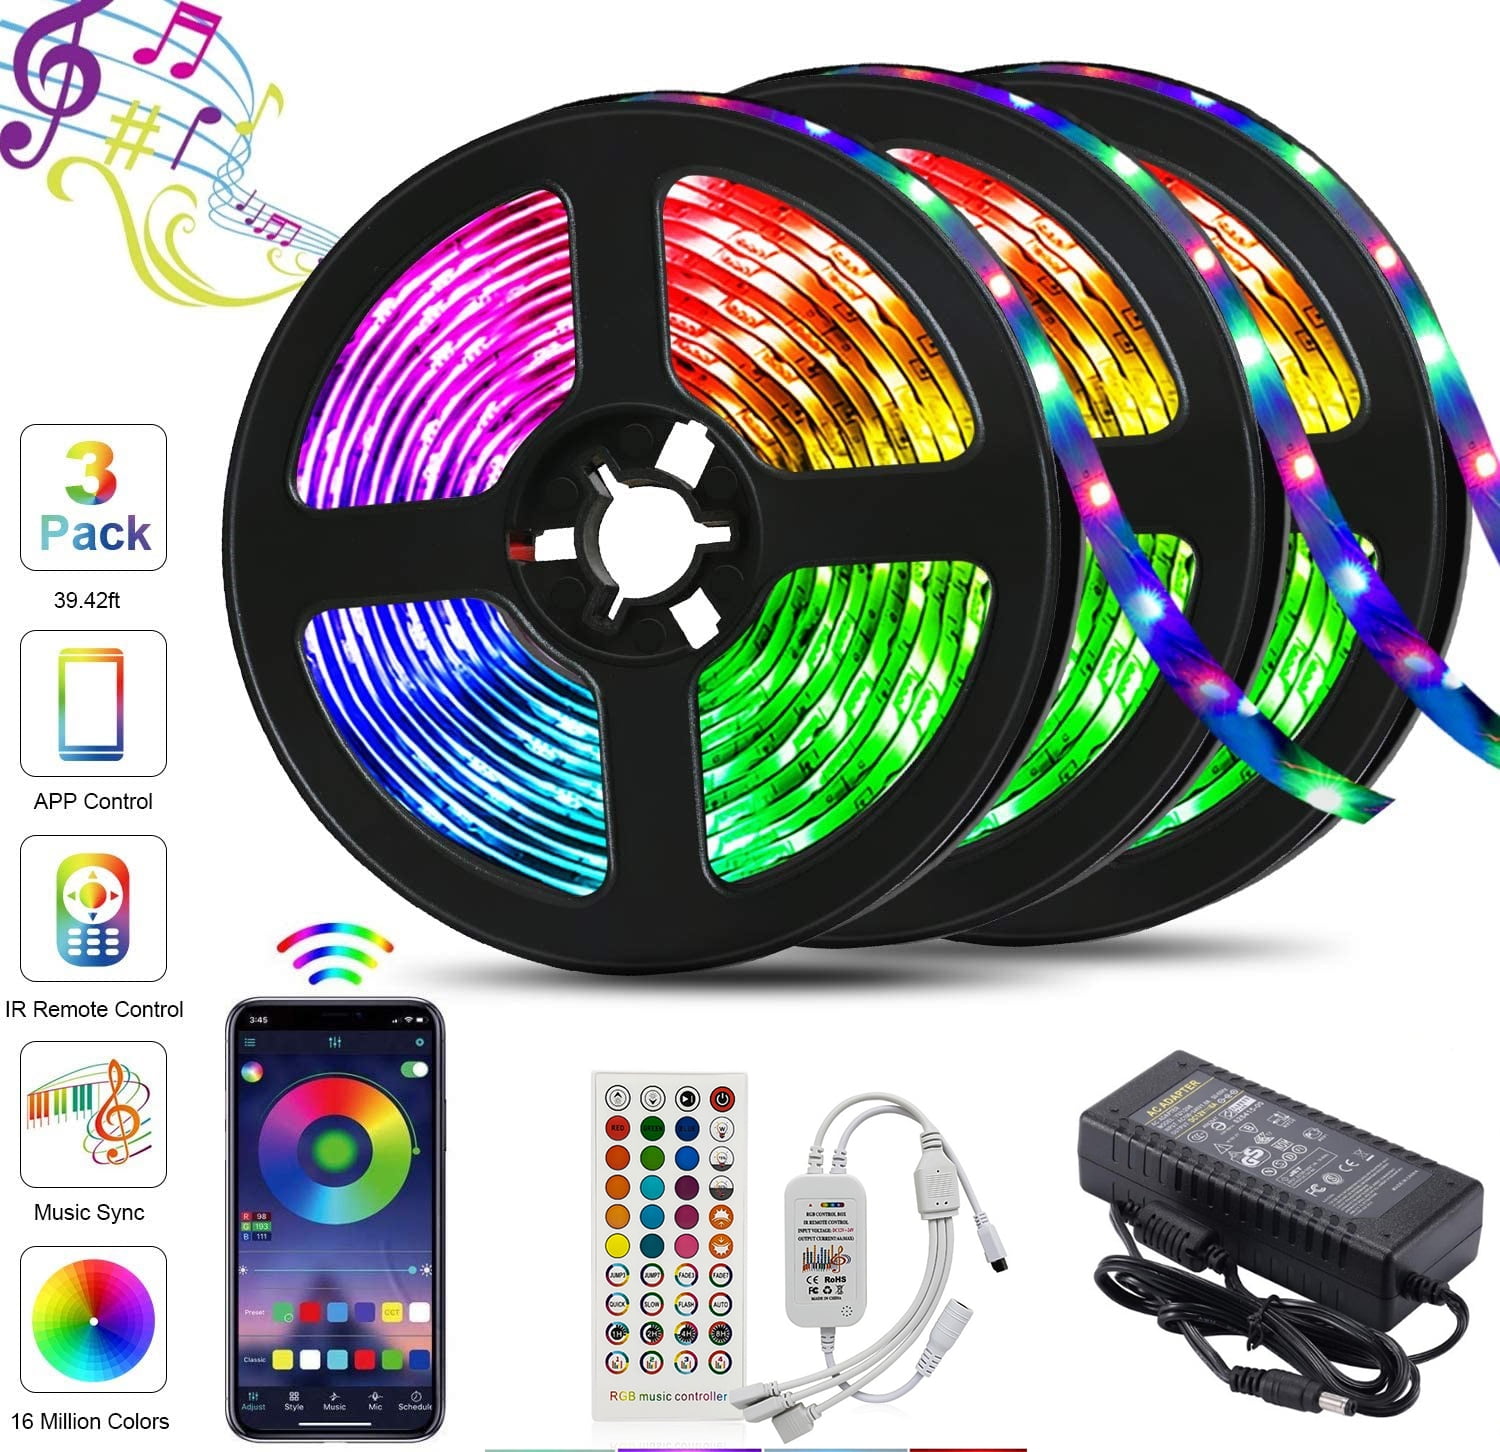 LED Strip Lights,15ft Waterproof Led SMD 5050 RGB 900 LEDS Color Changing Rope Lights with Bluetooth Controller Sync to Music Apply for TV,Bedroom,Party and Home Decoration - Walmart.com